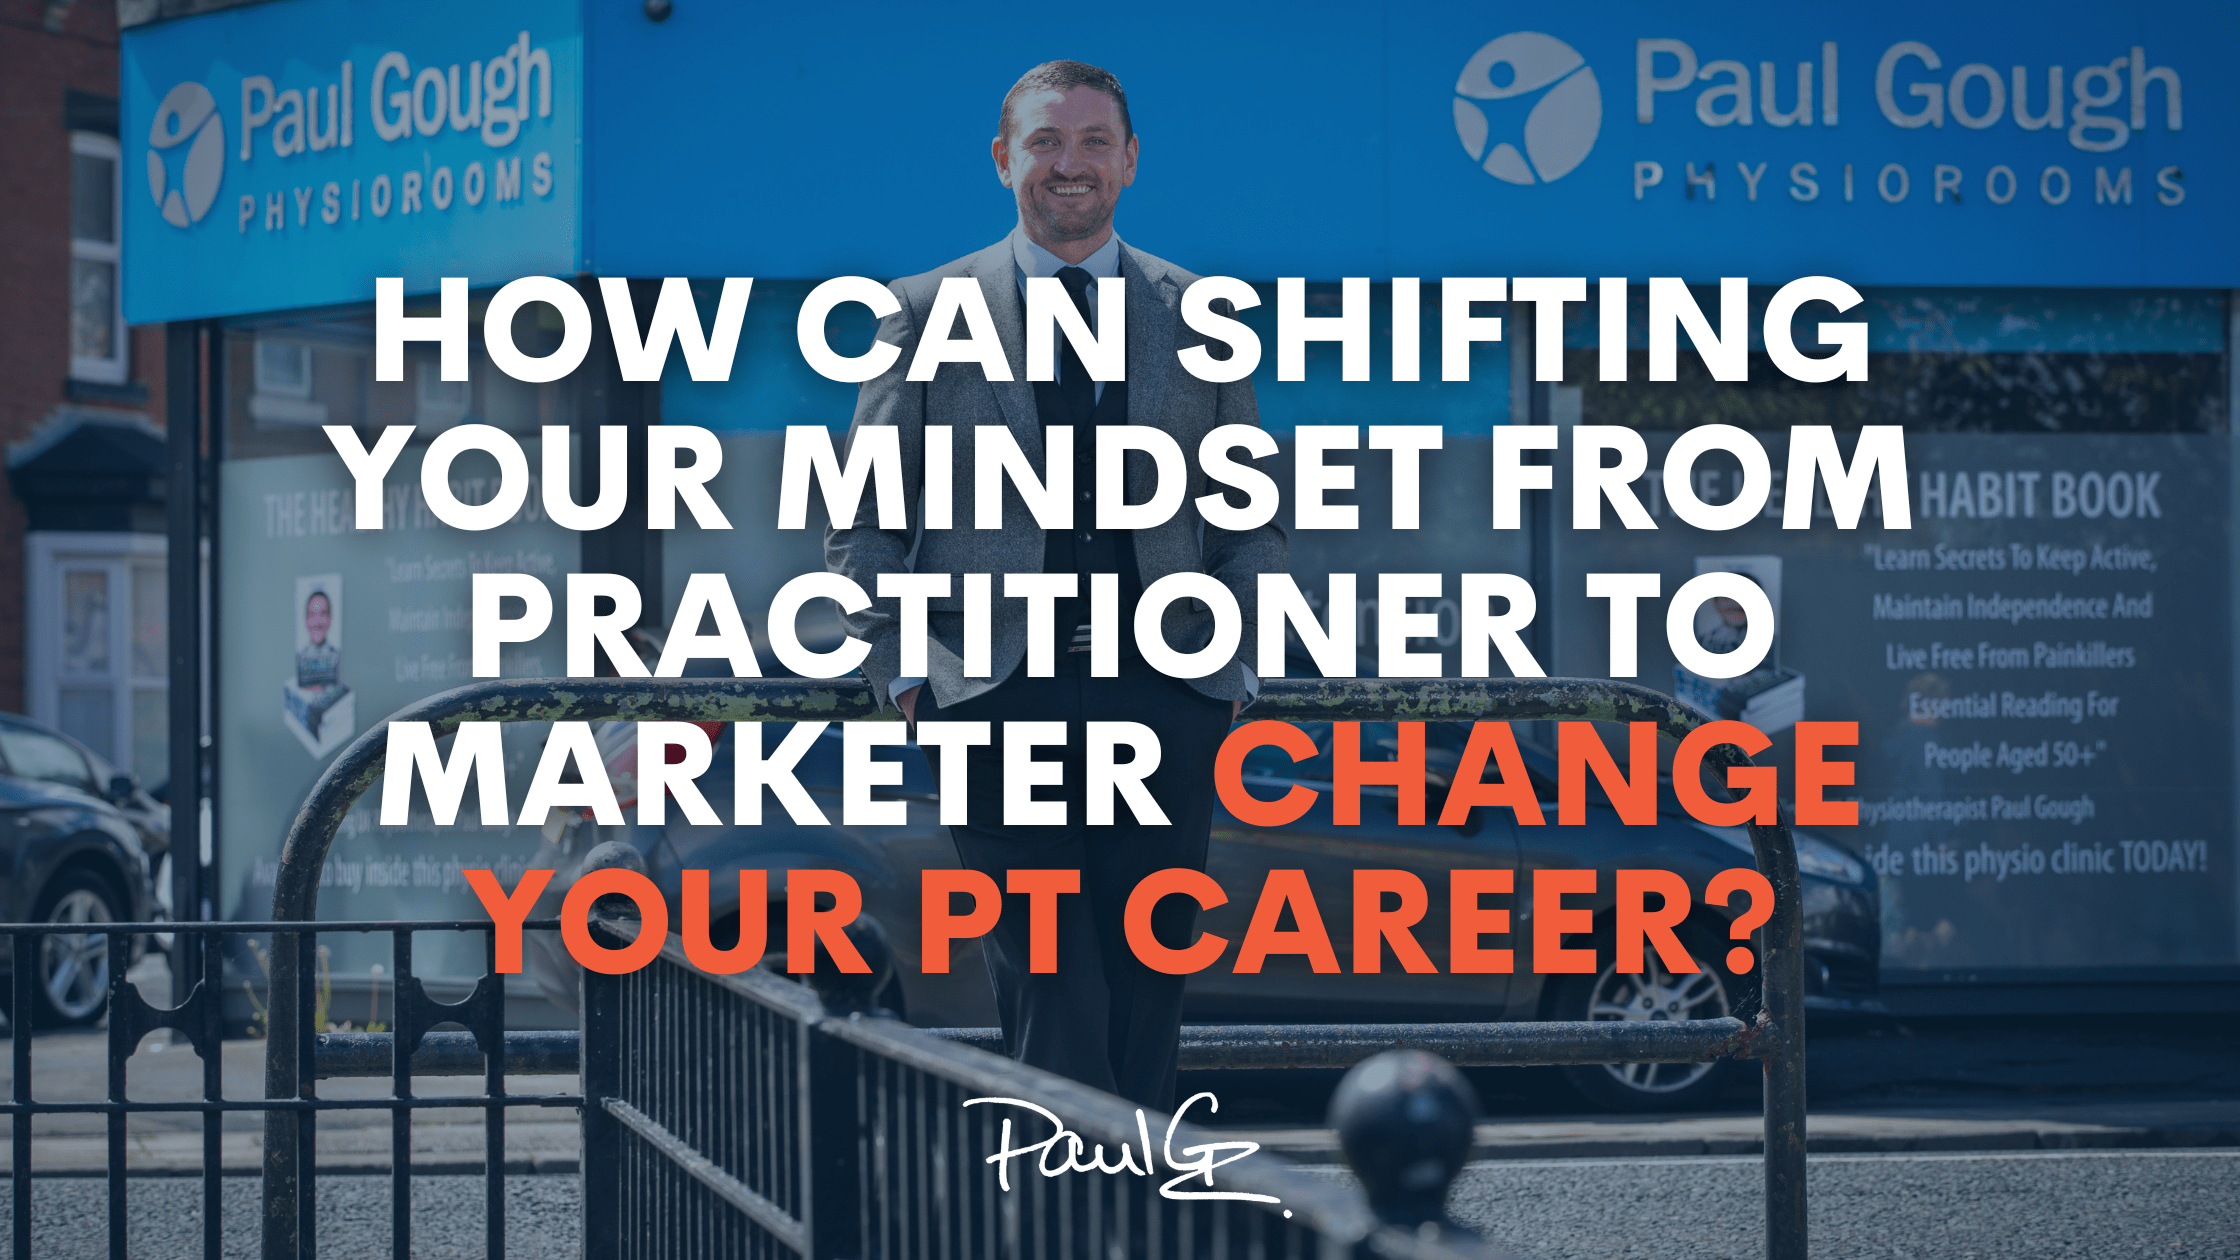 How Can Shifting Your Mindset From Practitioner to Marketer Change Your PT Career?